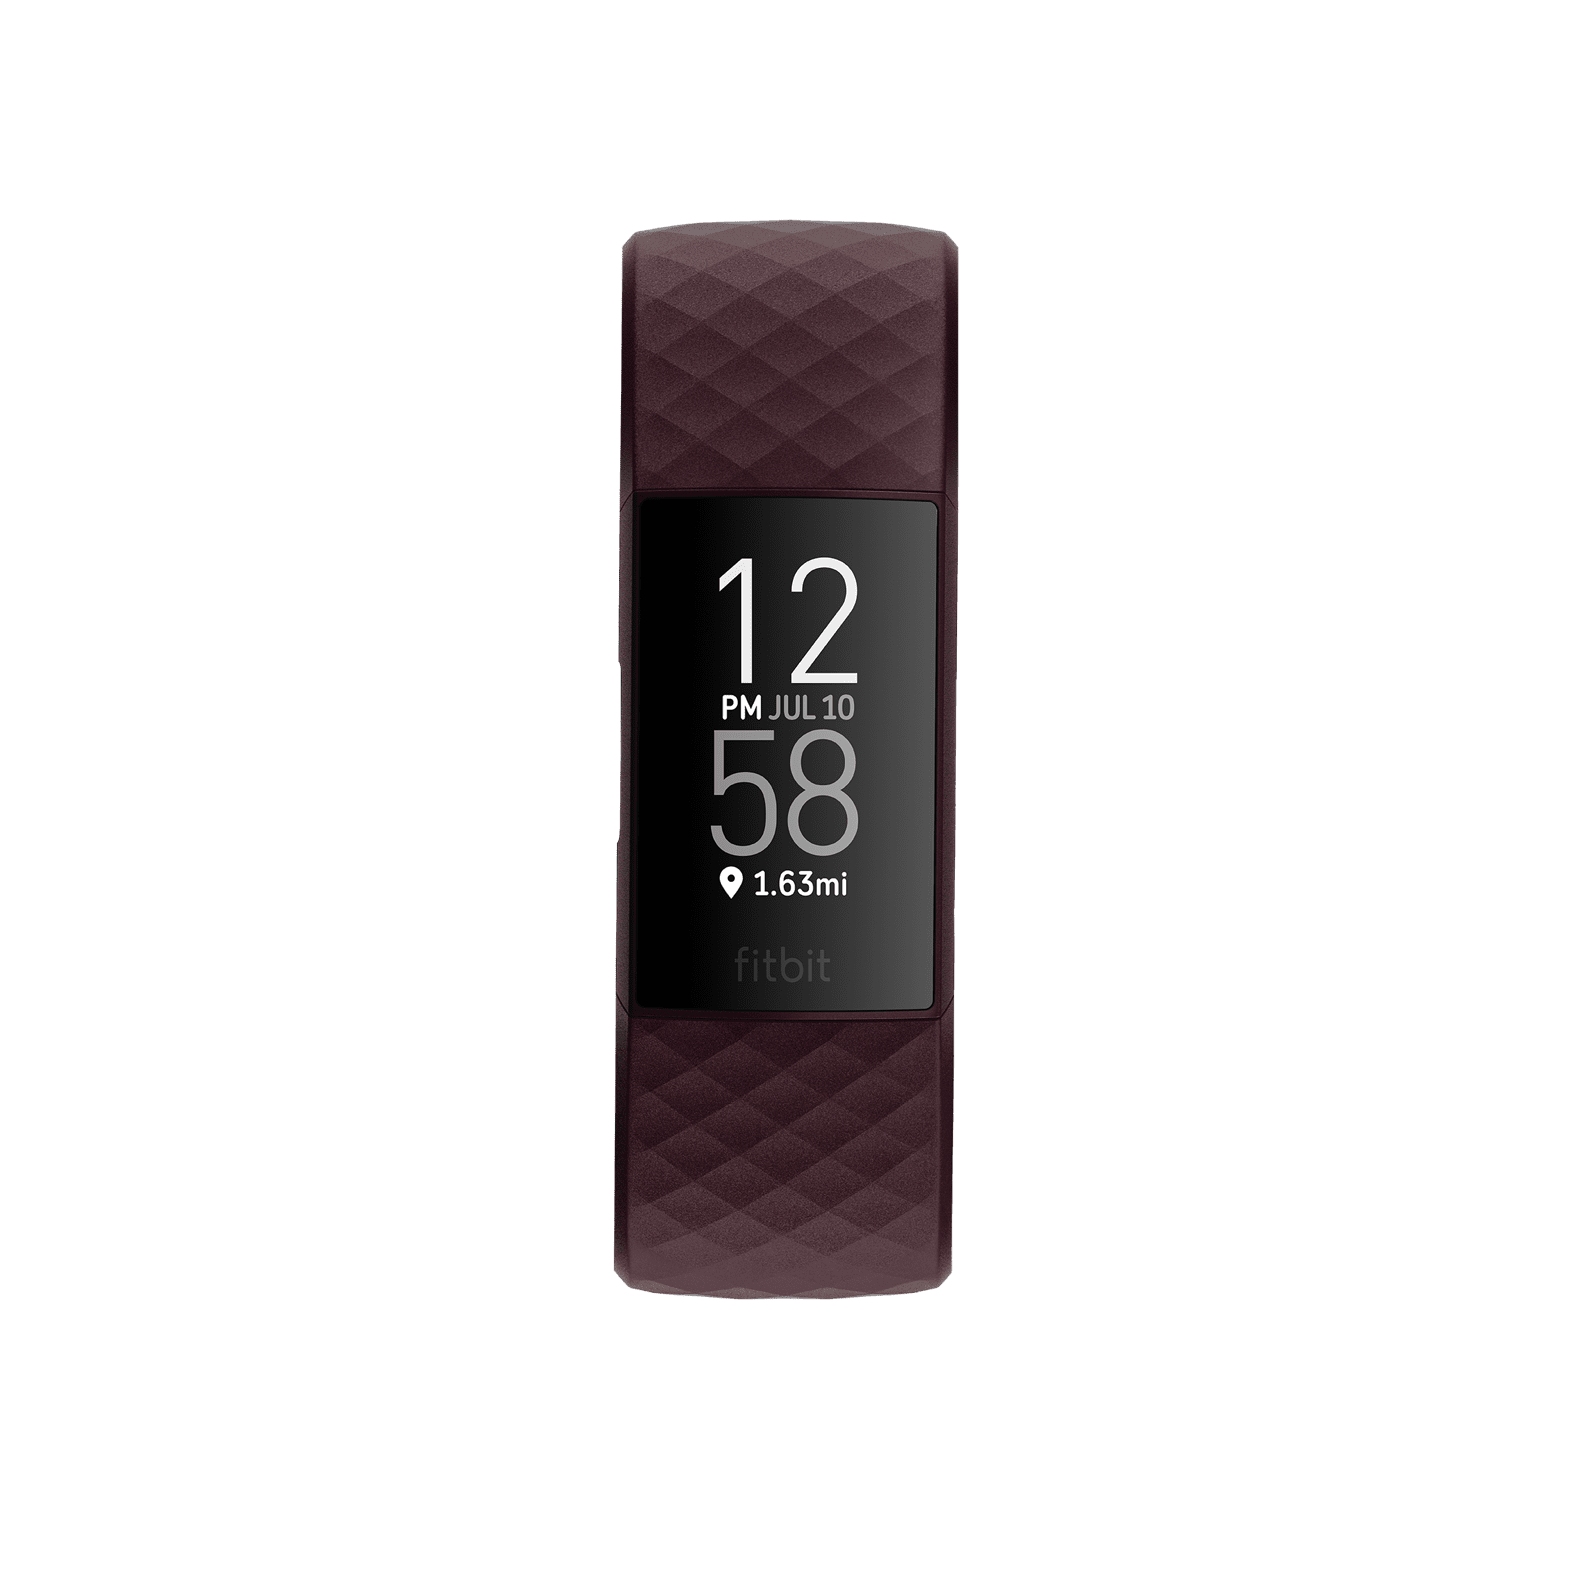 Fitbit Charge 4 Profile Fitbit